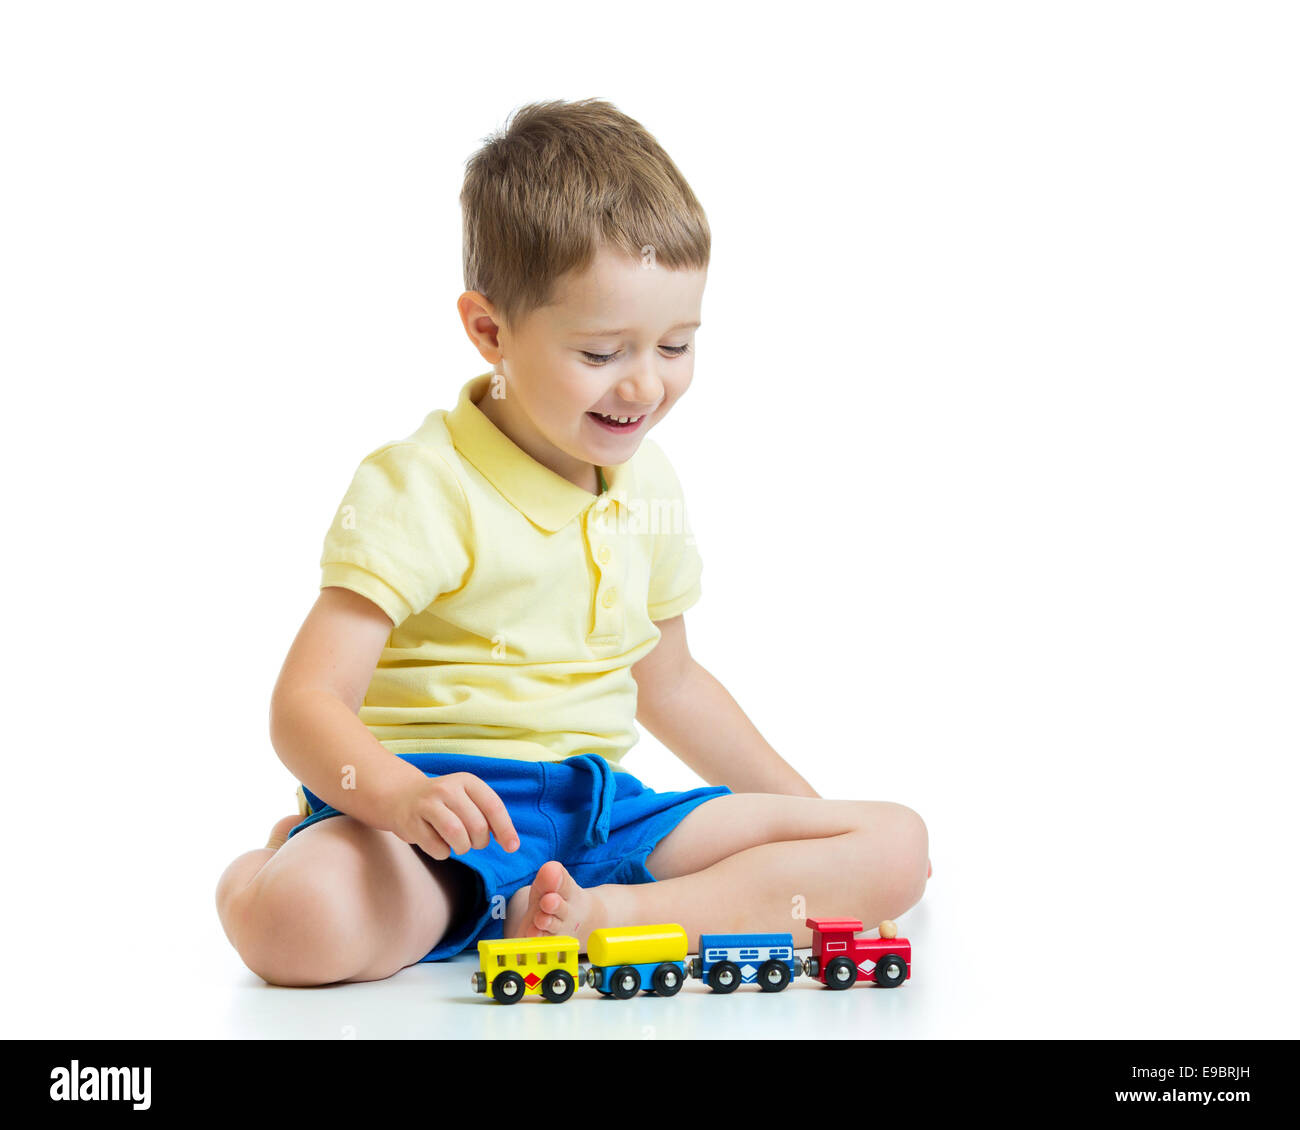 child boy playing with toys Stock Photo